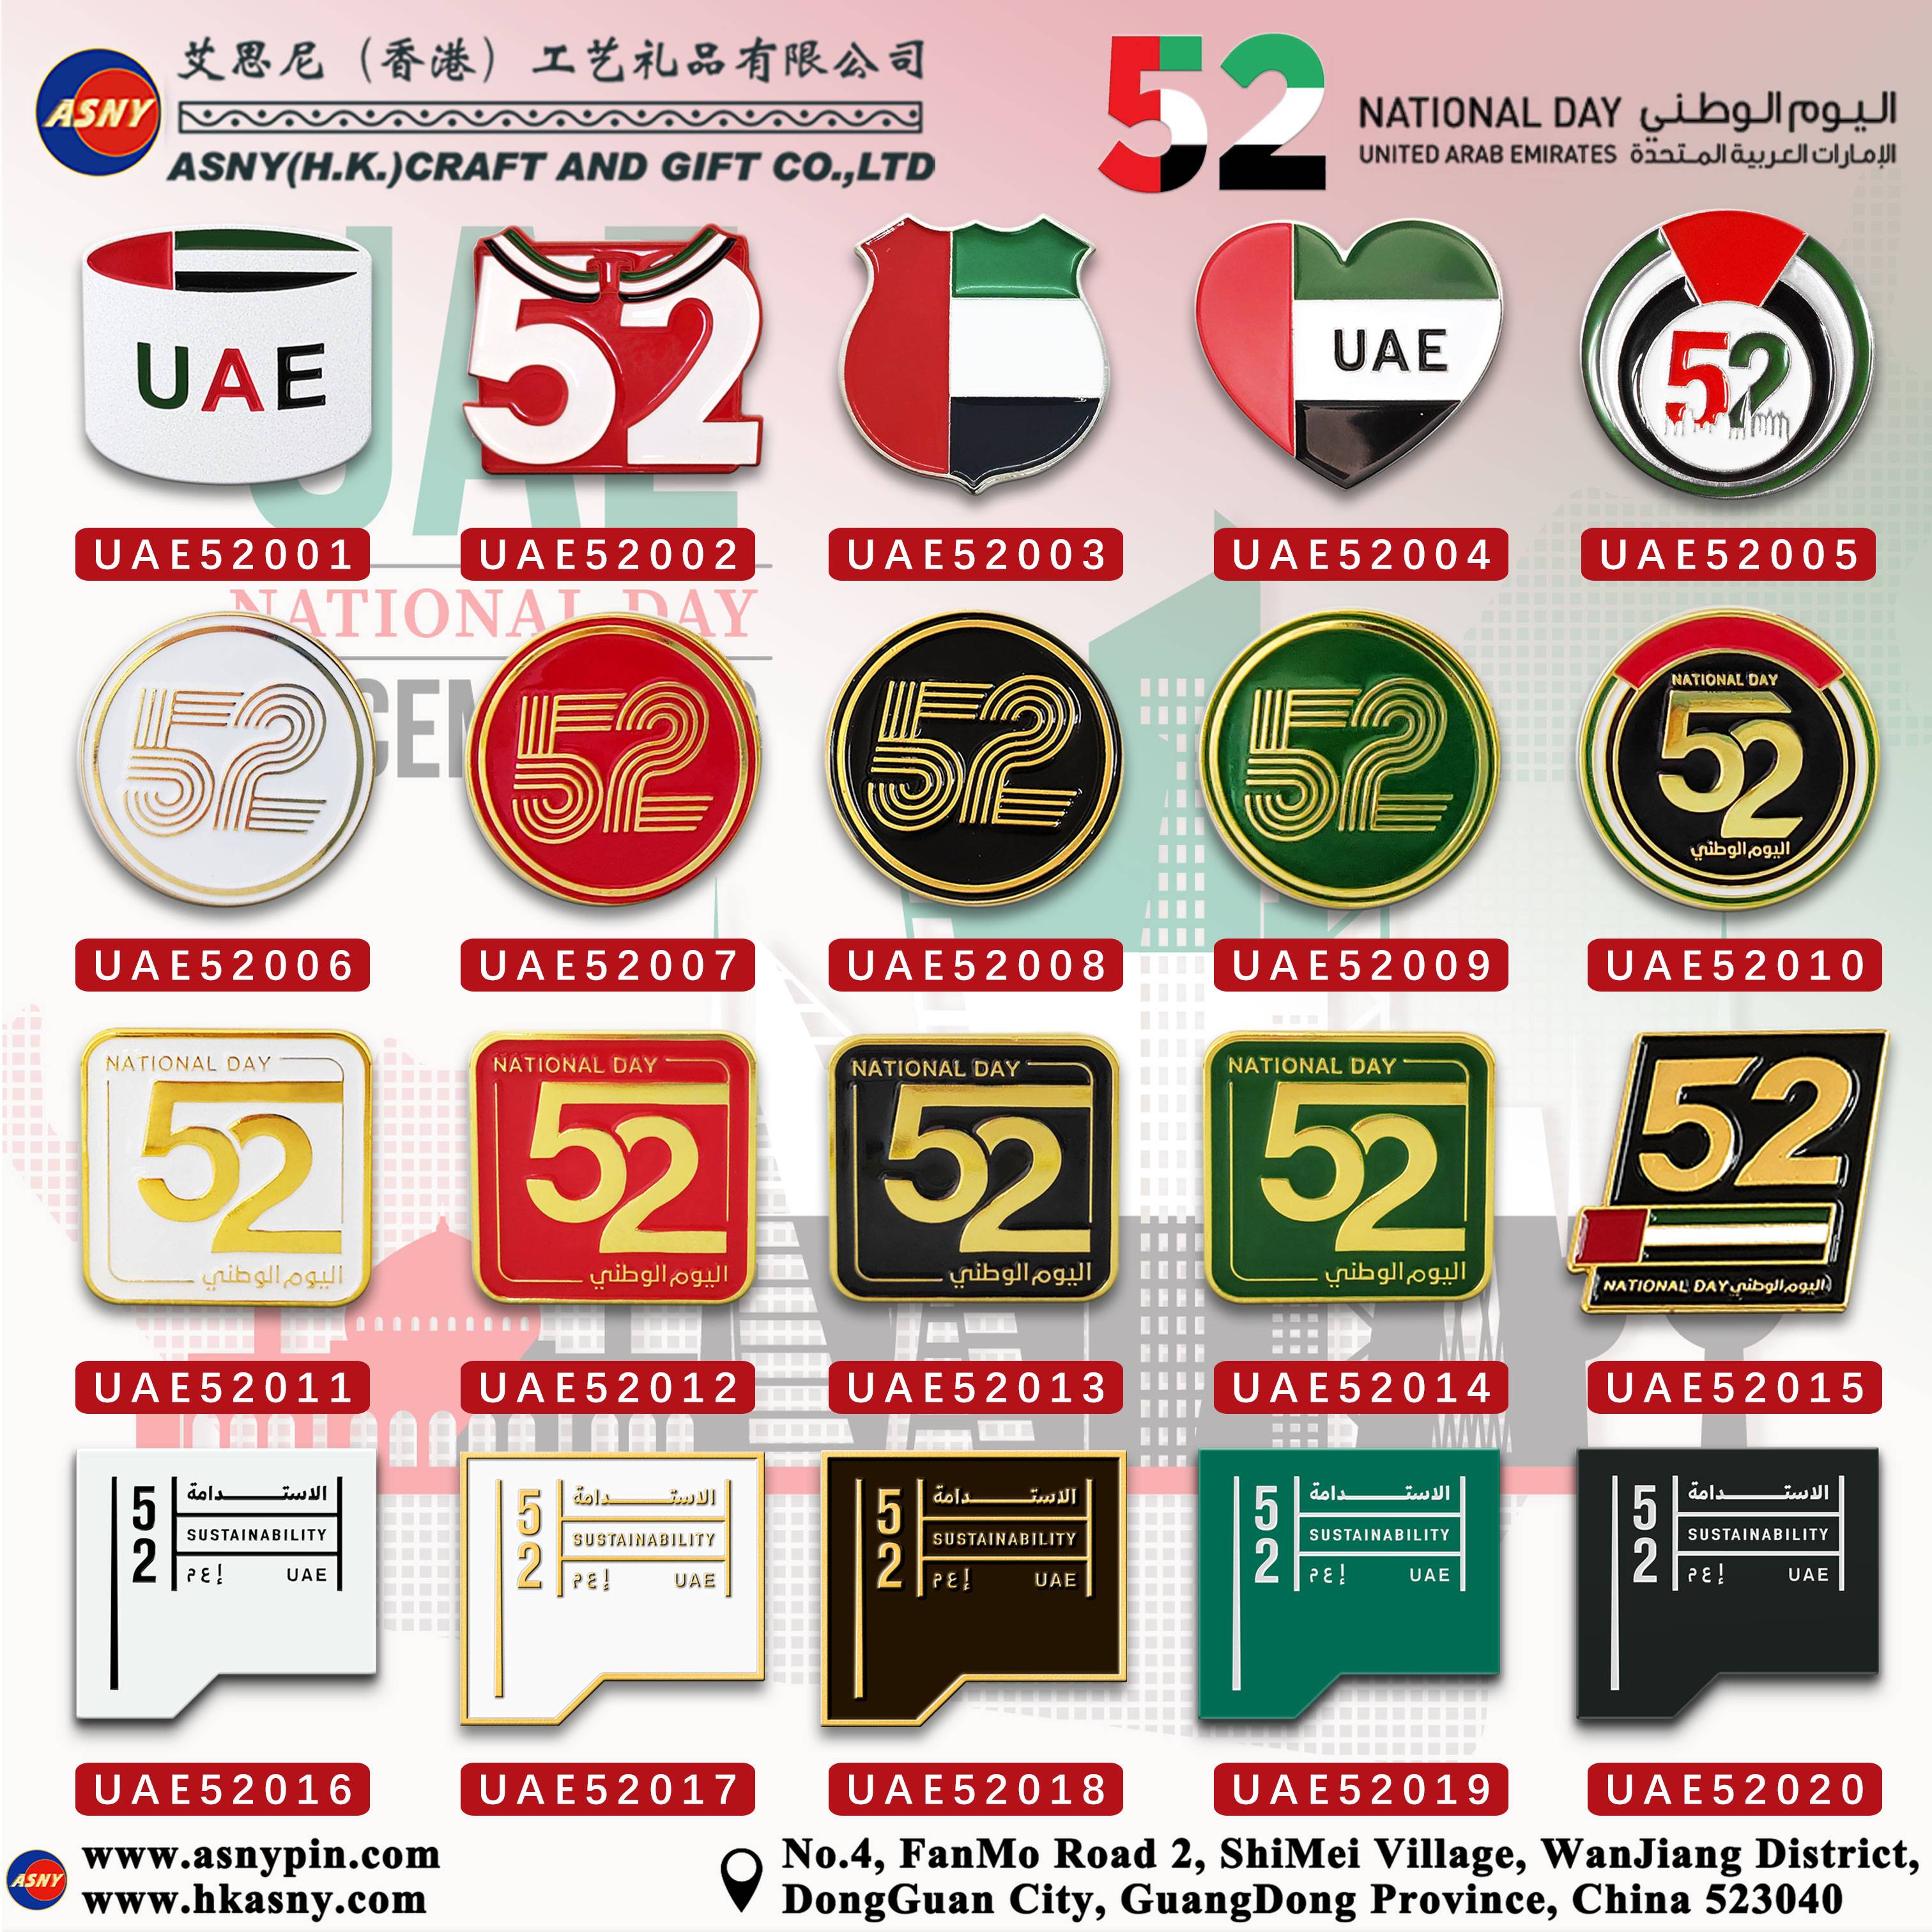 Catalog-UAE-52nd National Day-Souvenir-Craft-Promotional-Item-Price-Design-Customize-Production-Maker-Supply-Factory-1